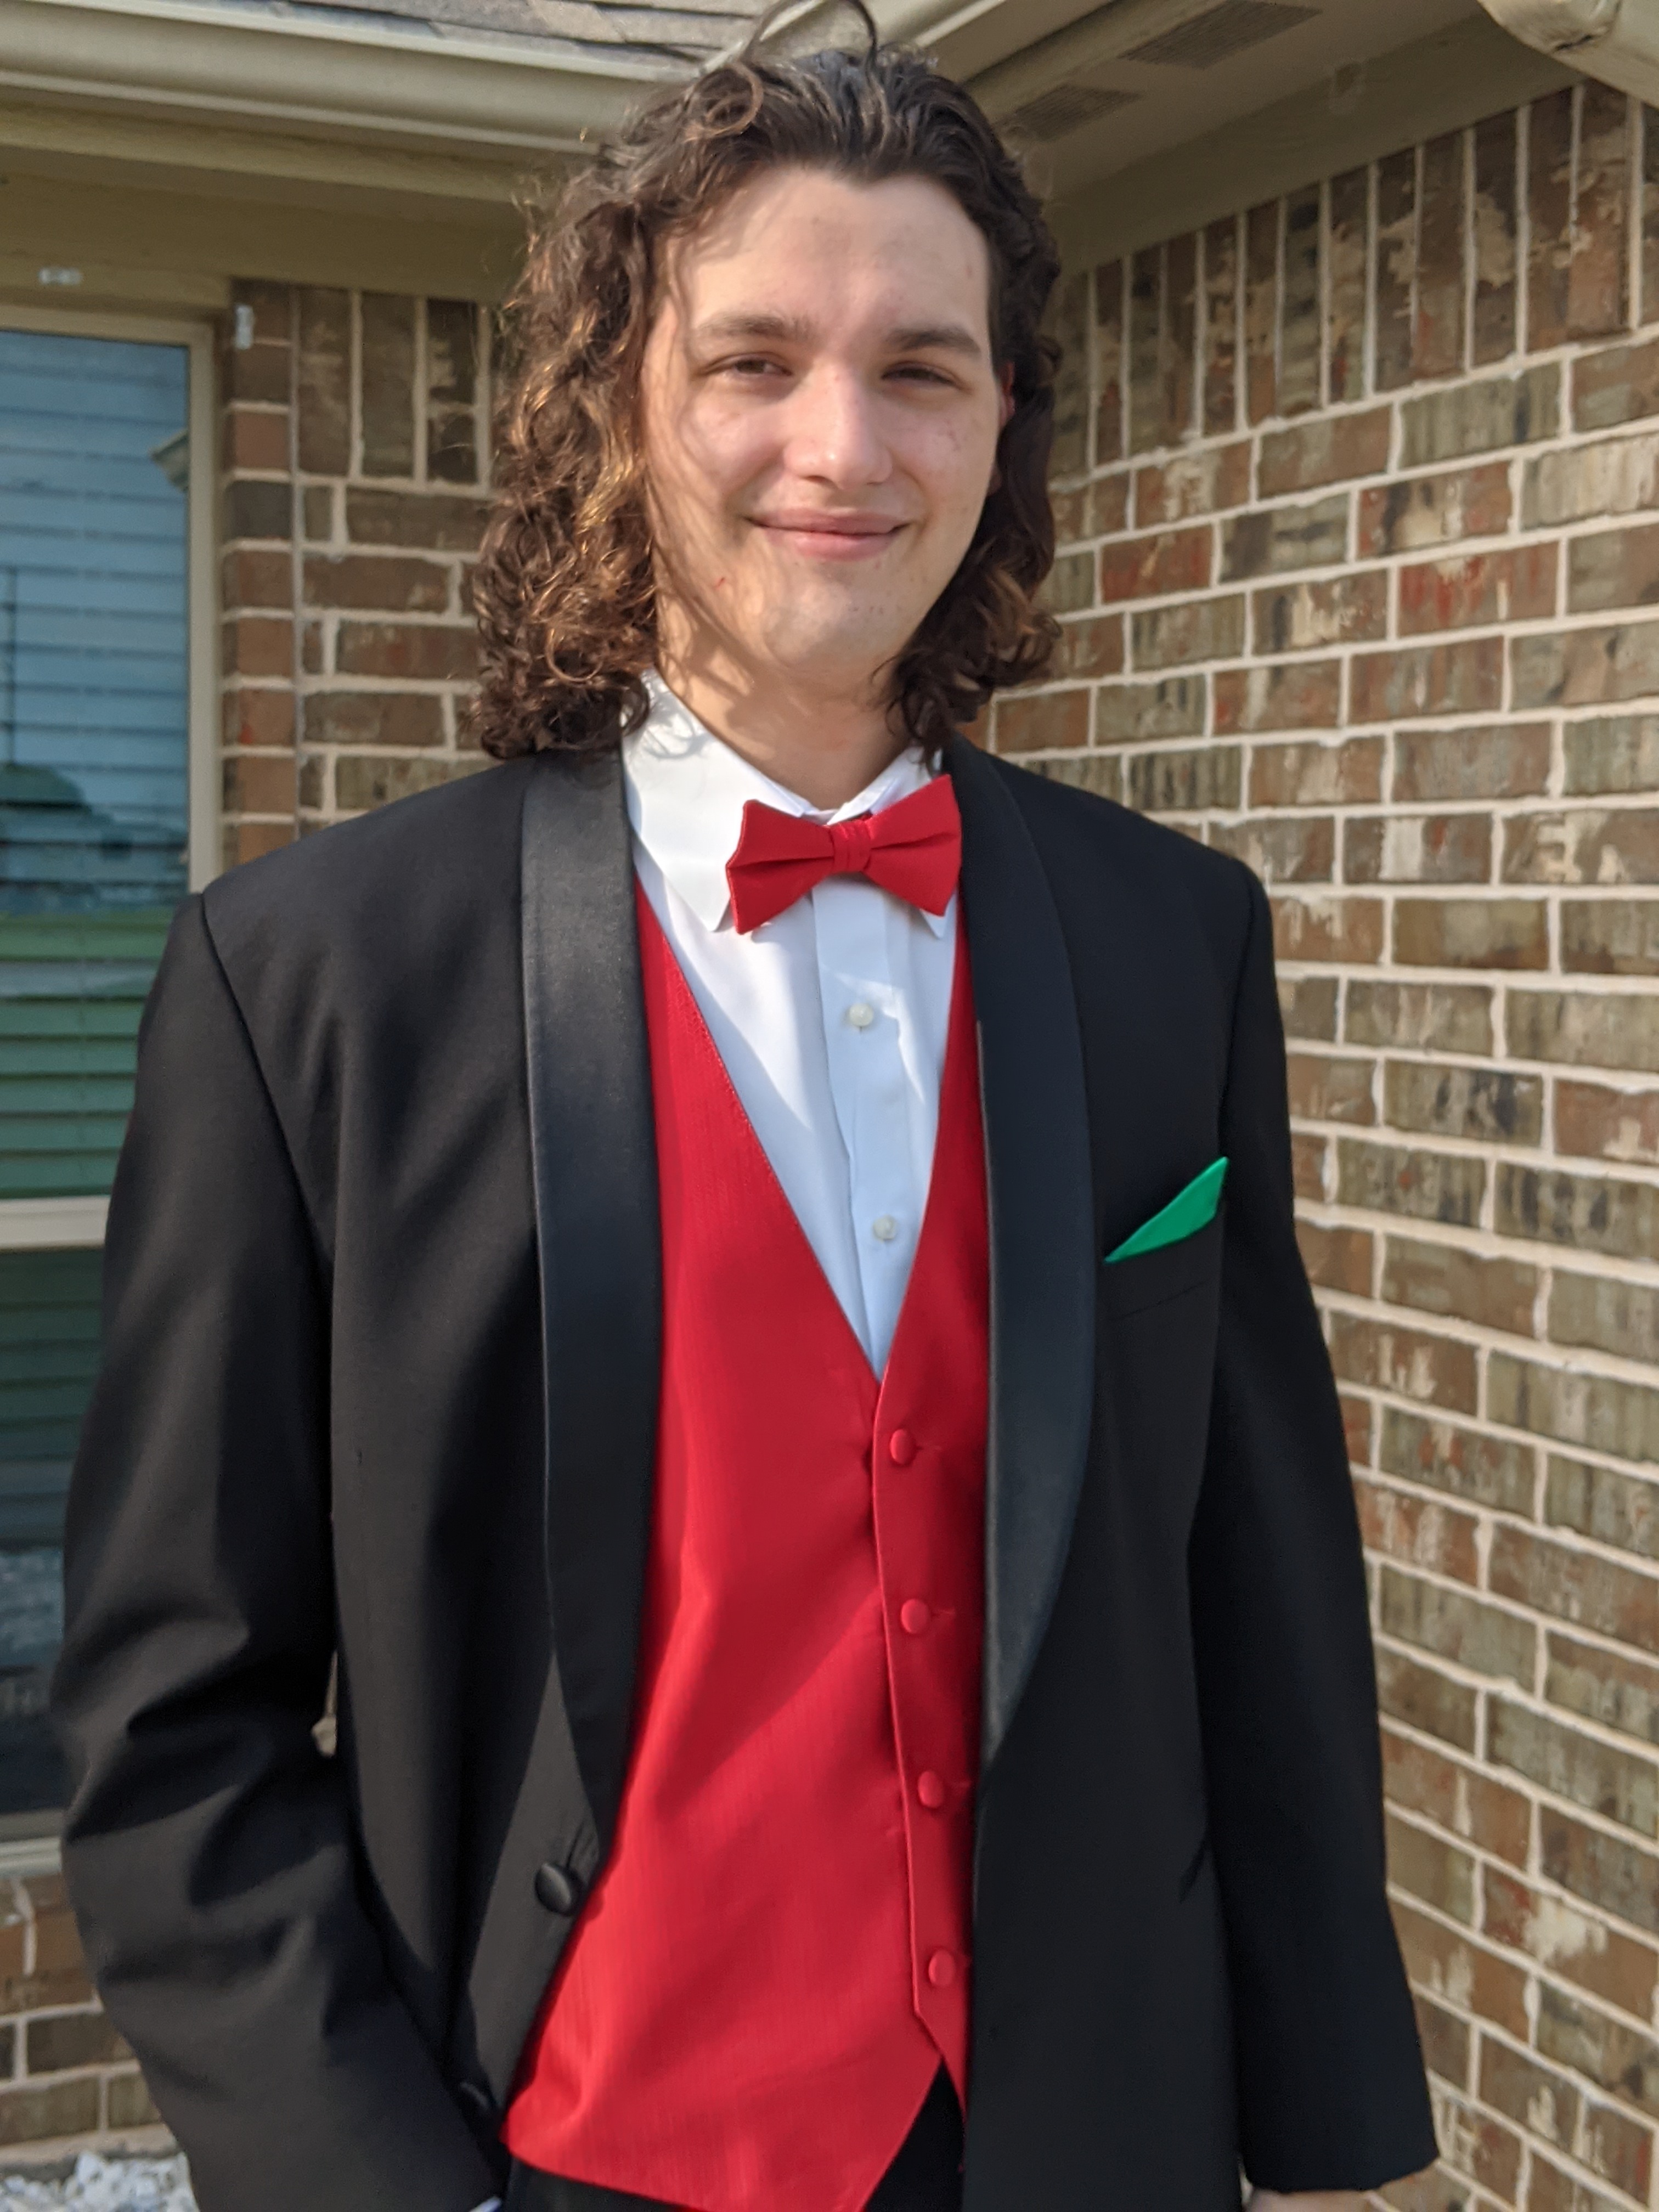 Image of a young smiling man in a tuxedo